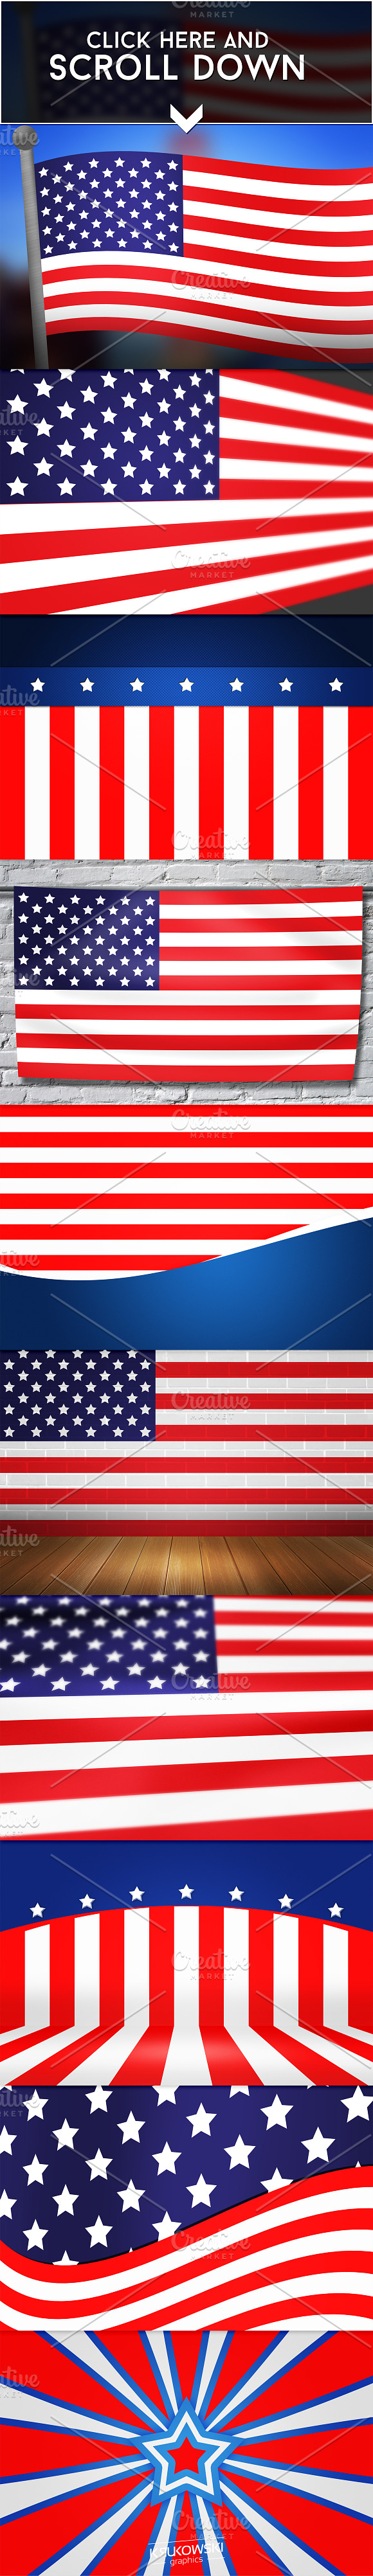 USA PSD Backdrop in Textures - product preview 1